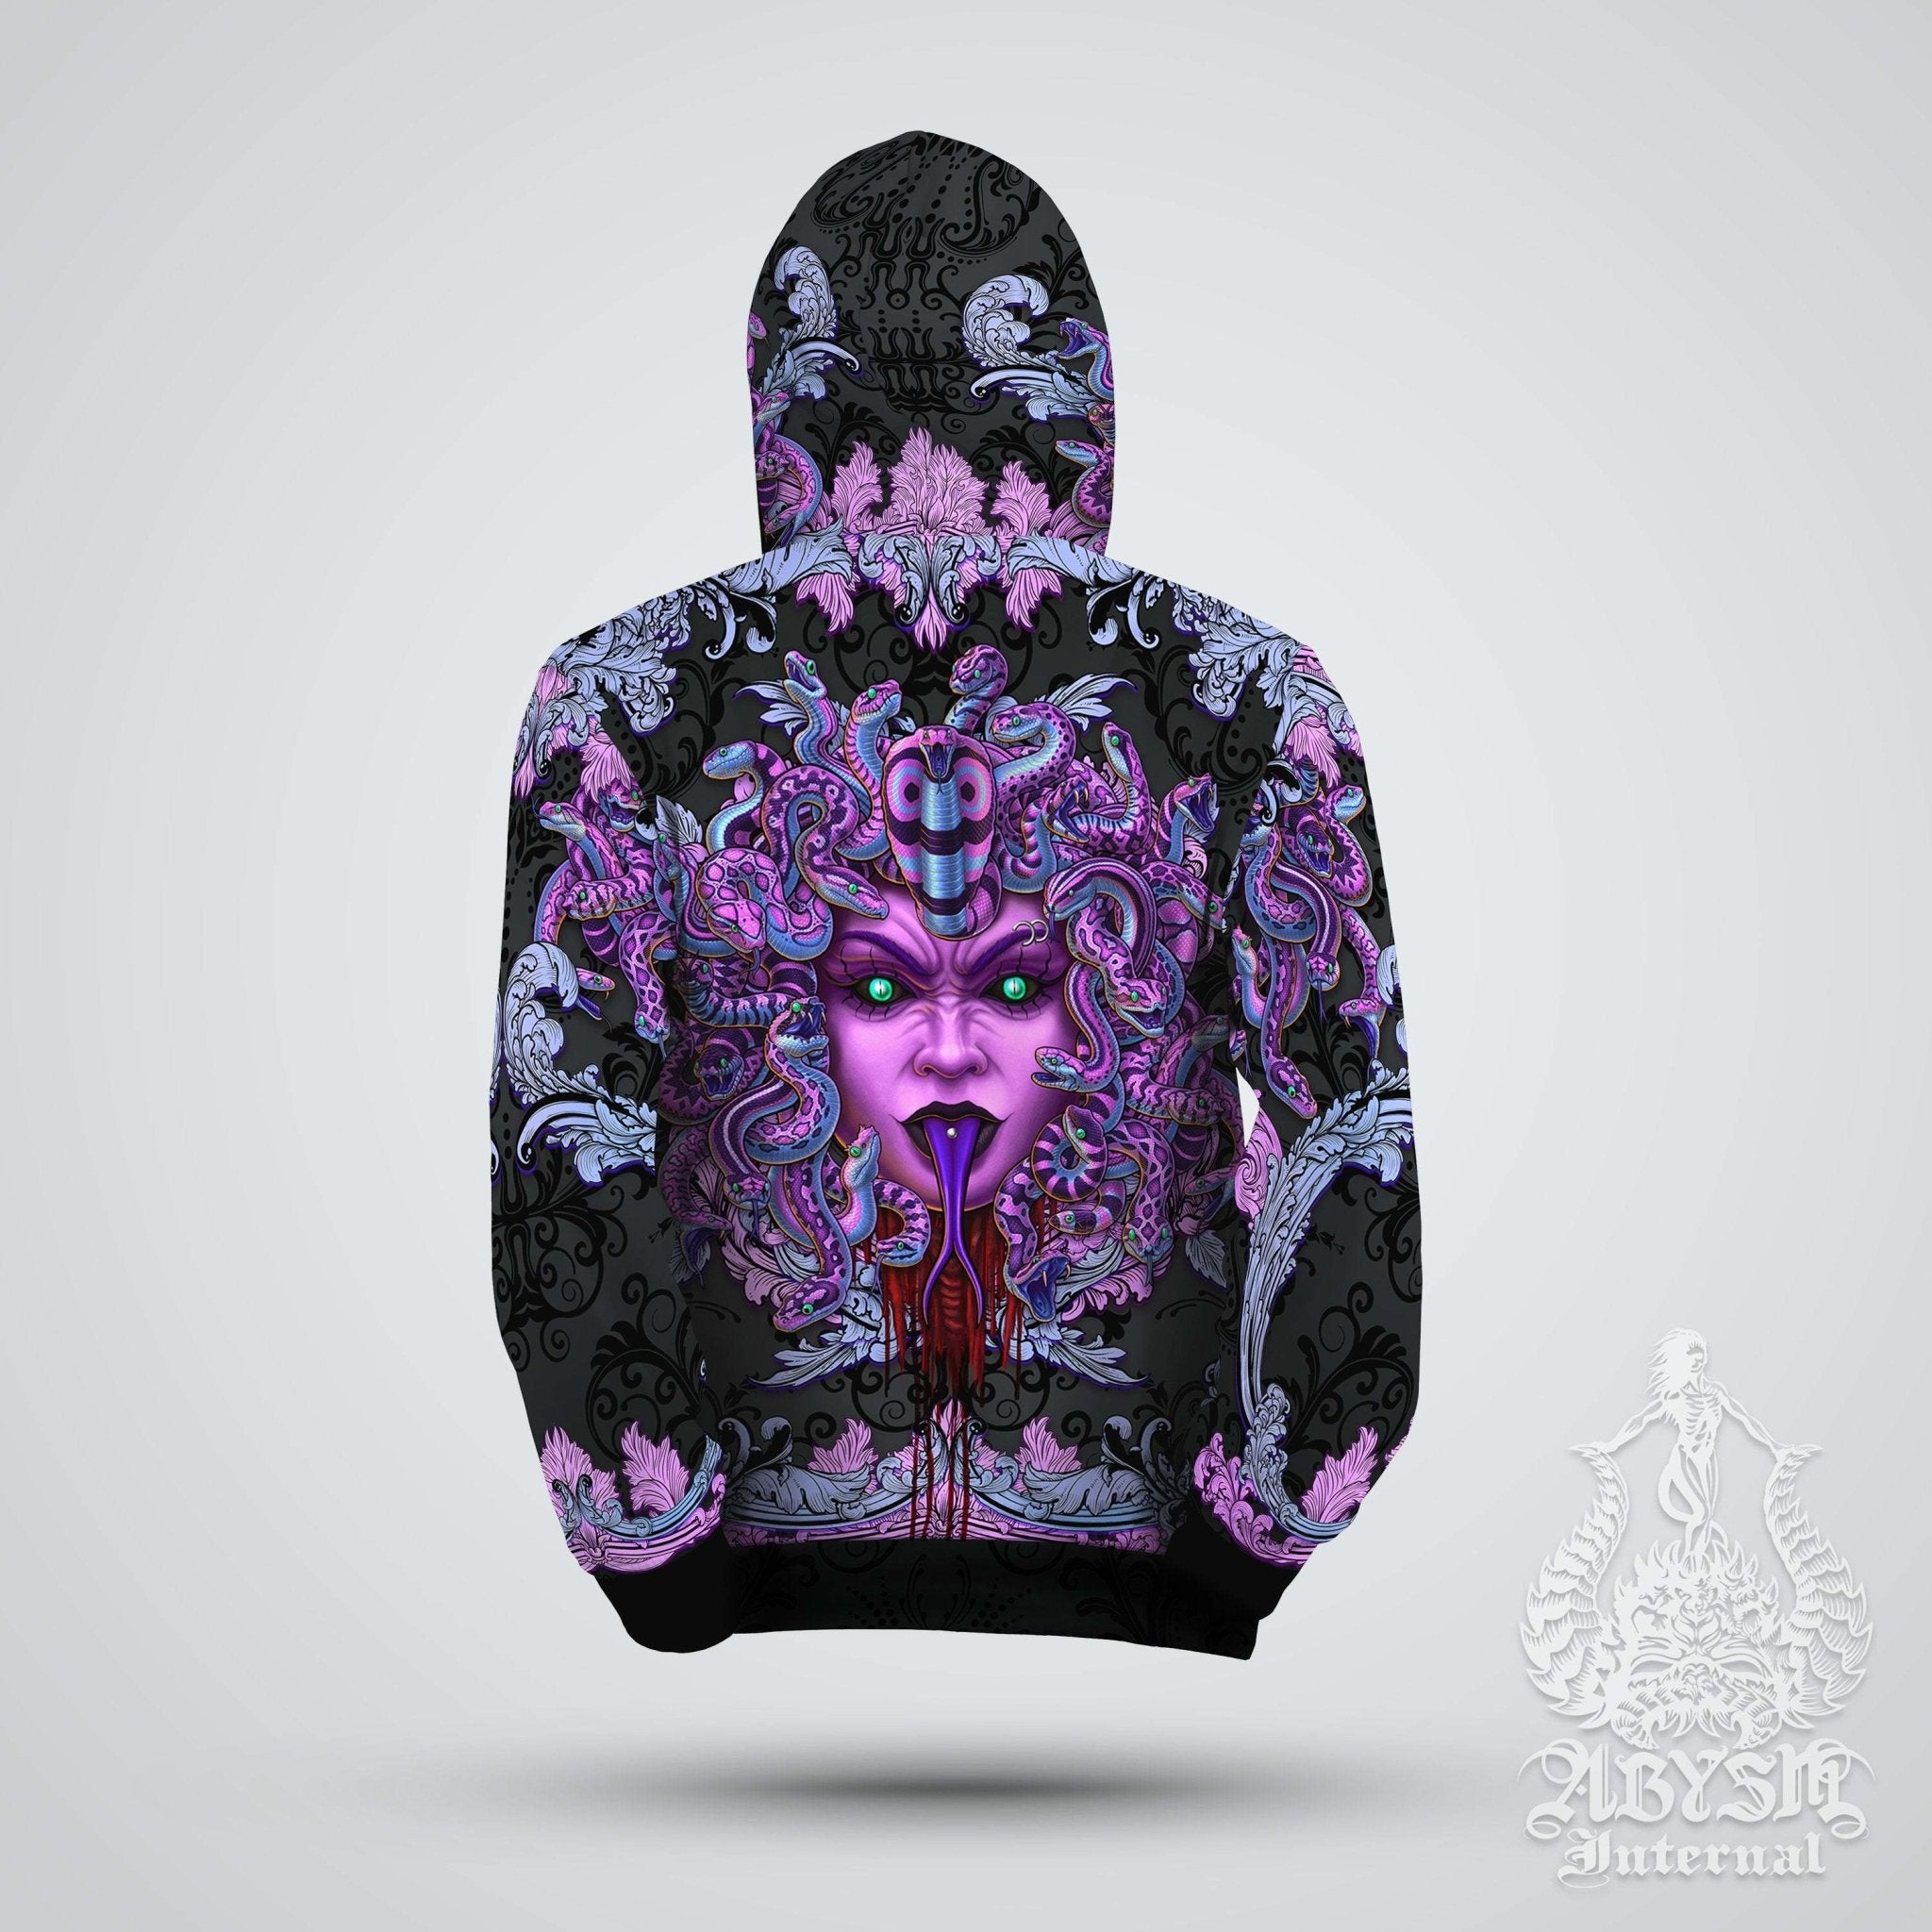 Pastel Goth Hoodie, Trippy Streetwear, Skater and Rave Outfit, Alternative Clothing, Unisex - Medusa, Black and Purple - Abysm Internal